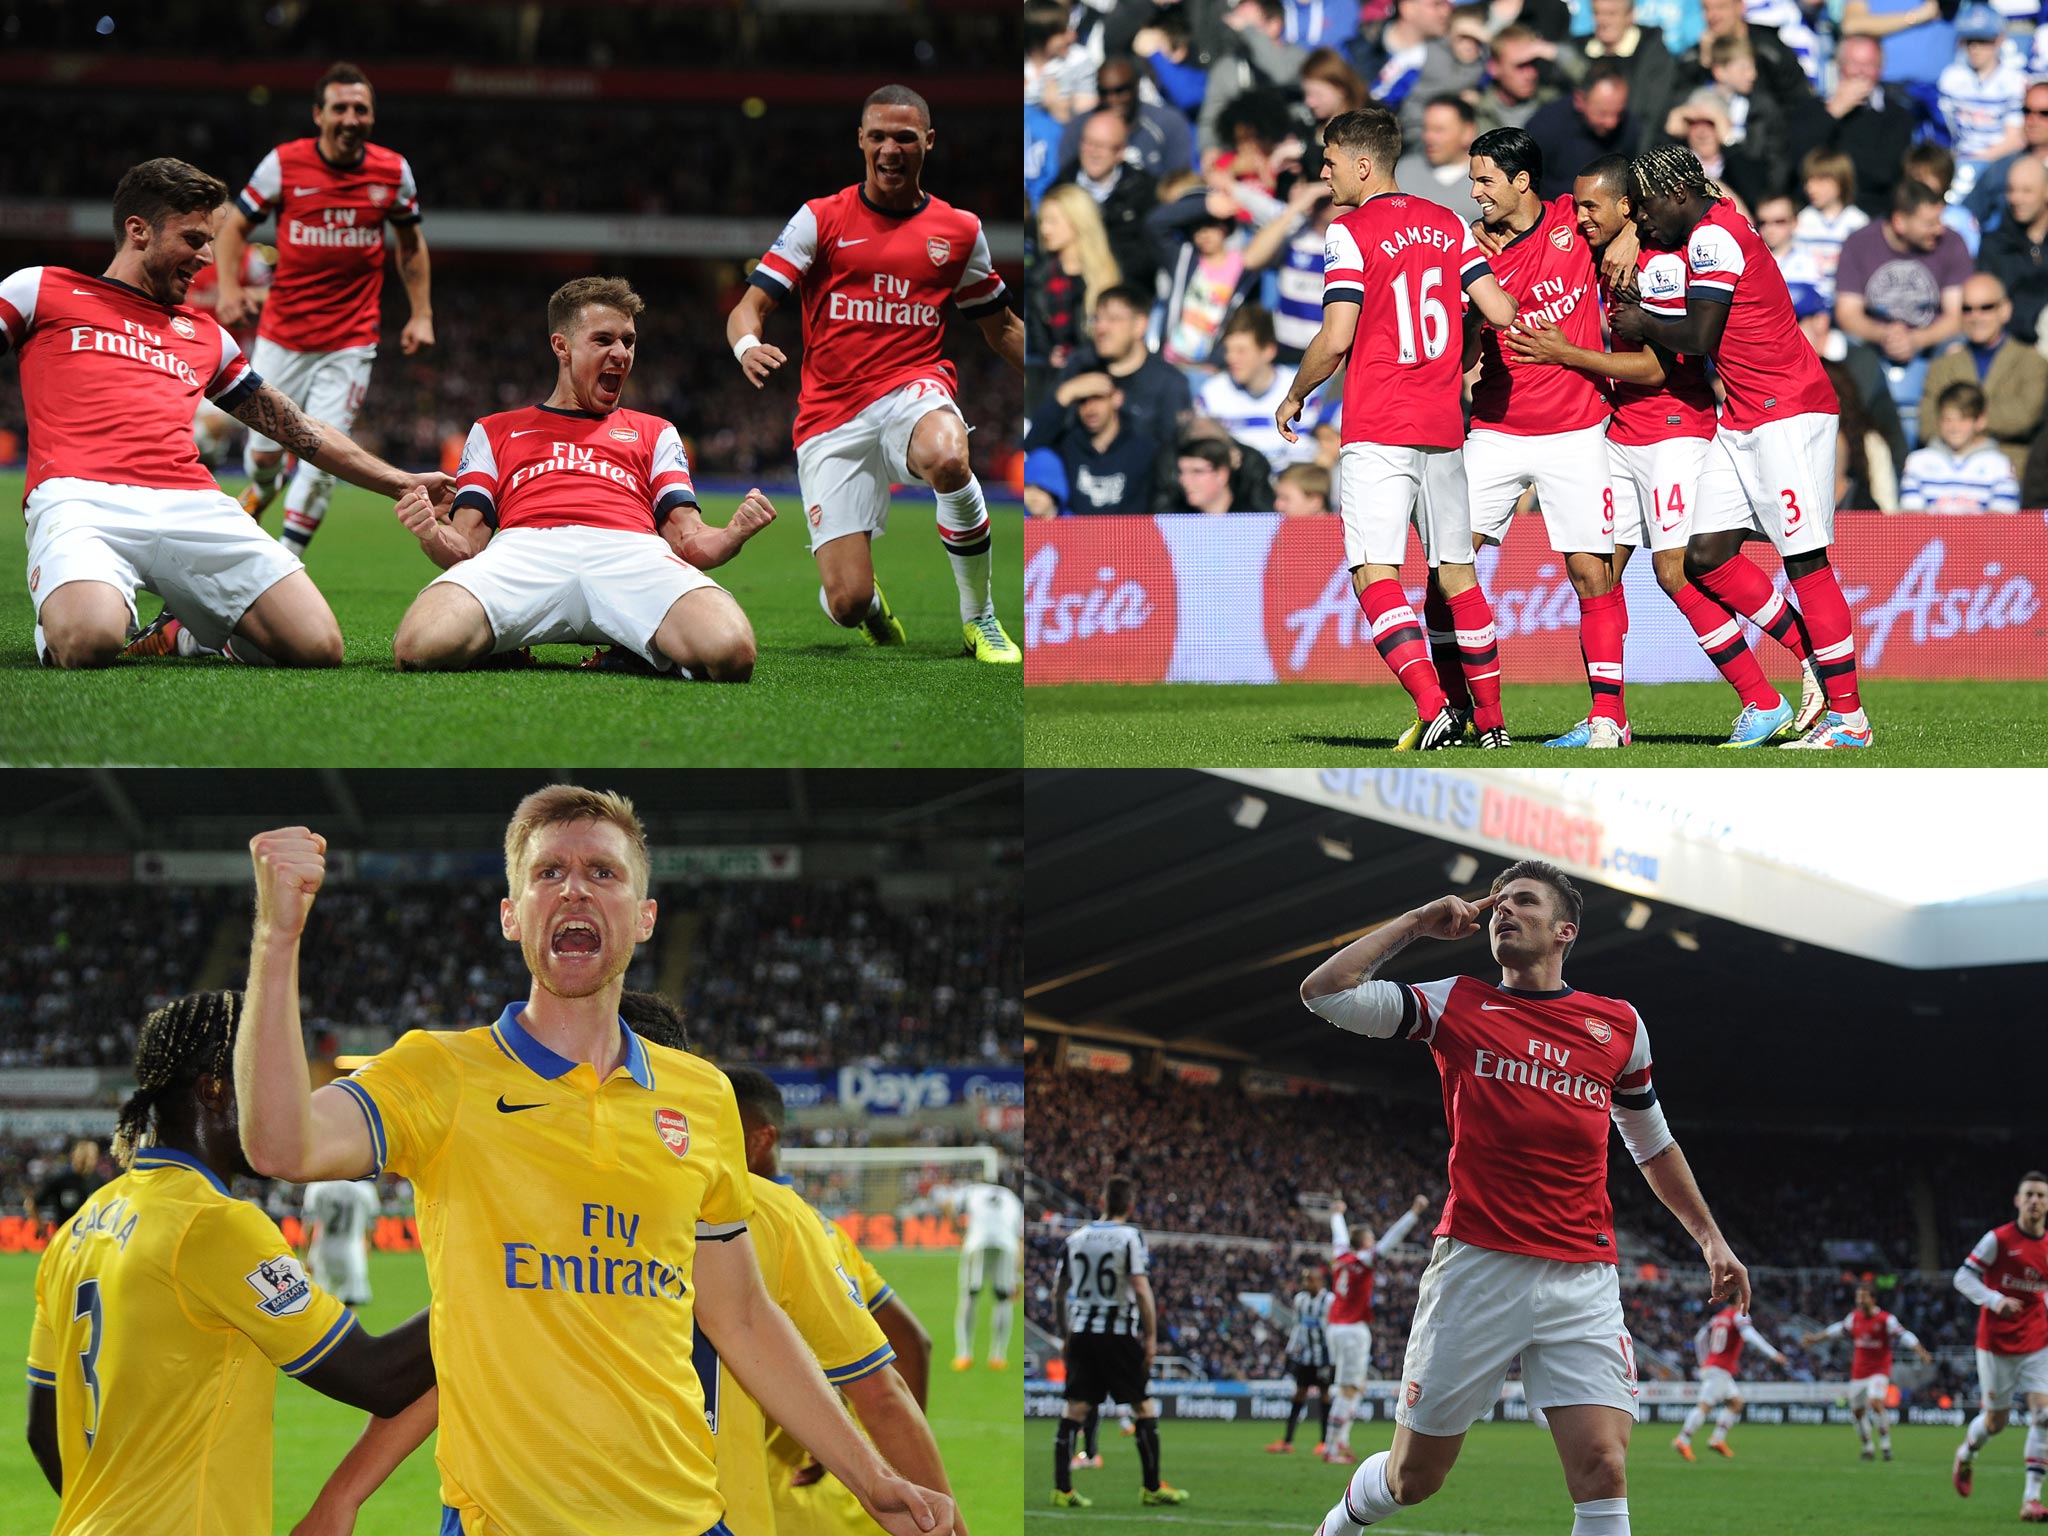 Aaron Ramsey scores in the 2-0 win over Liverpool on November 2 2013, Per Mertesacker celebrates the victory against Swansea on September 28 2013, Theo Walcott scores against QPR on May 4 2013 and Olivier Giroud salutes the away crowd after scoring agains